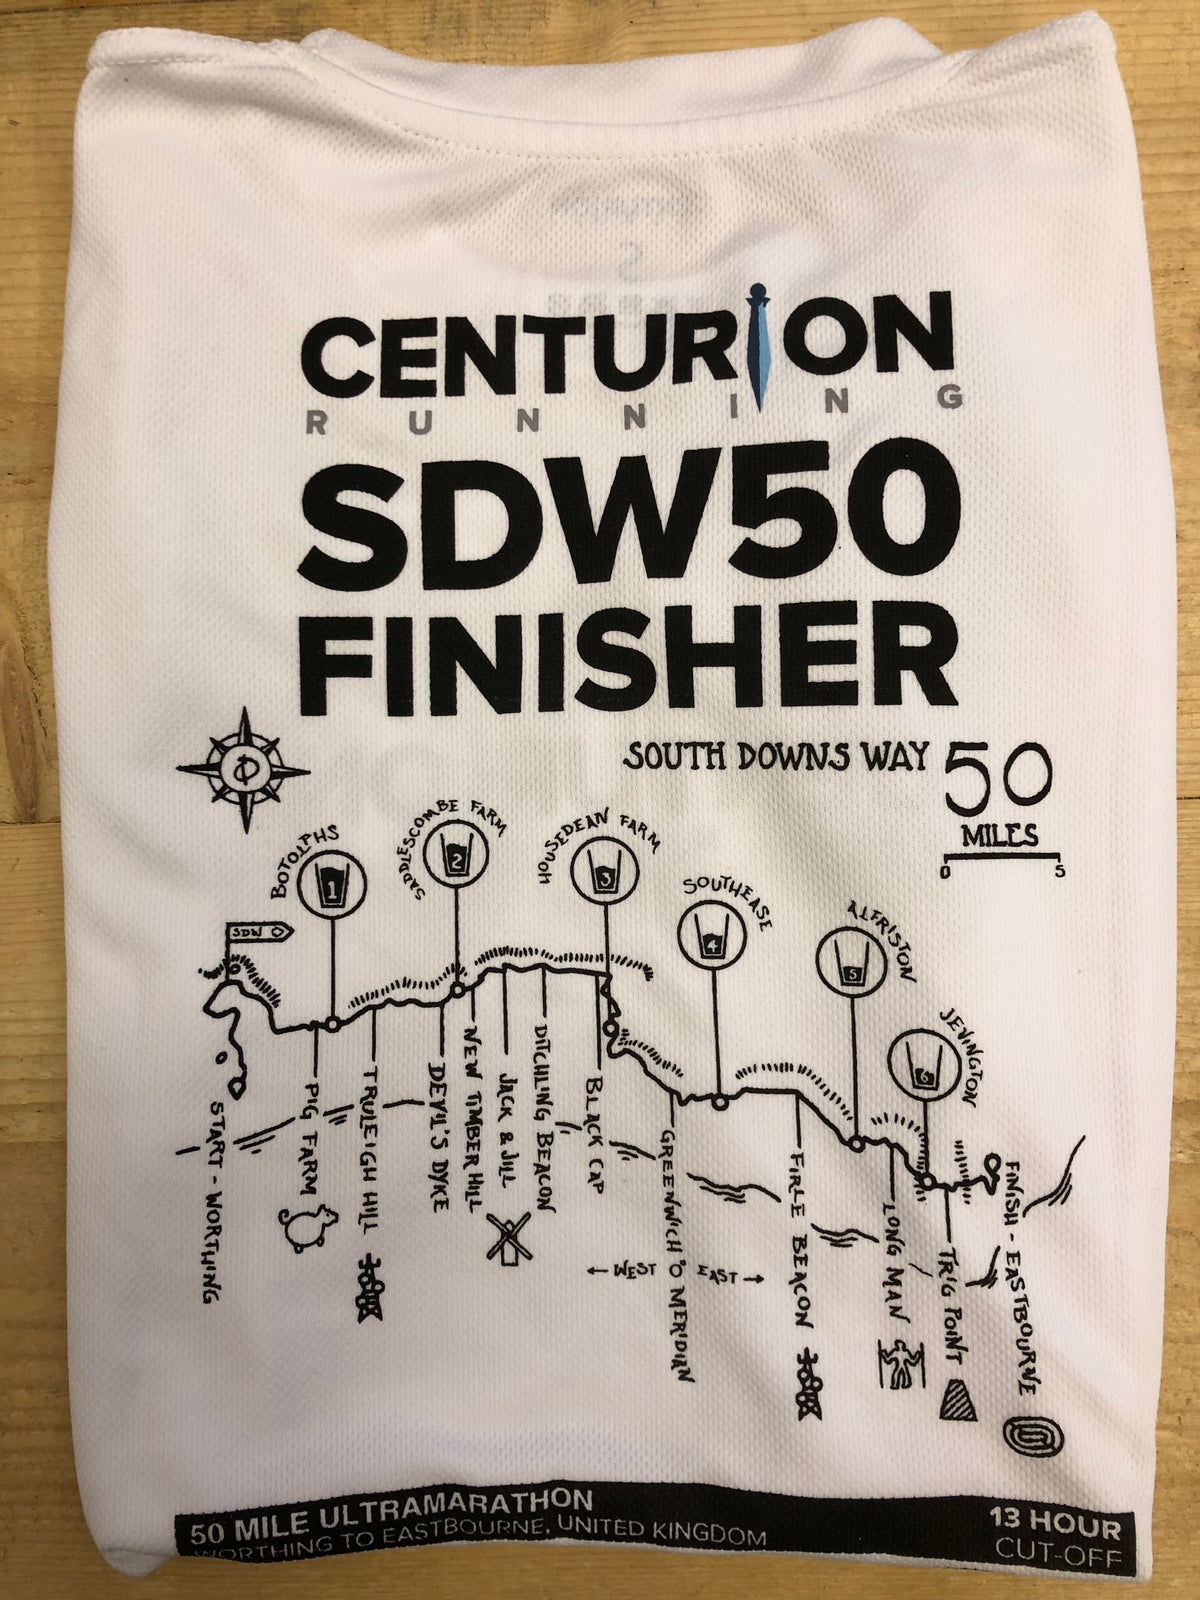 Centurion Running South Downs Way 50 Finisher Tee